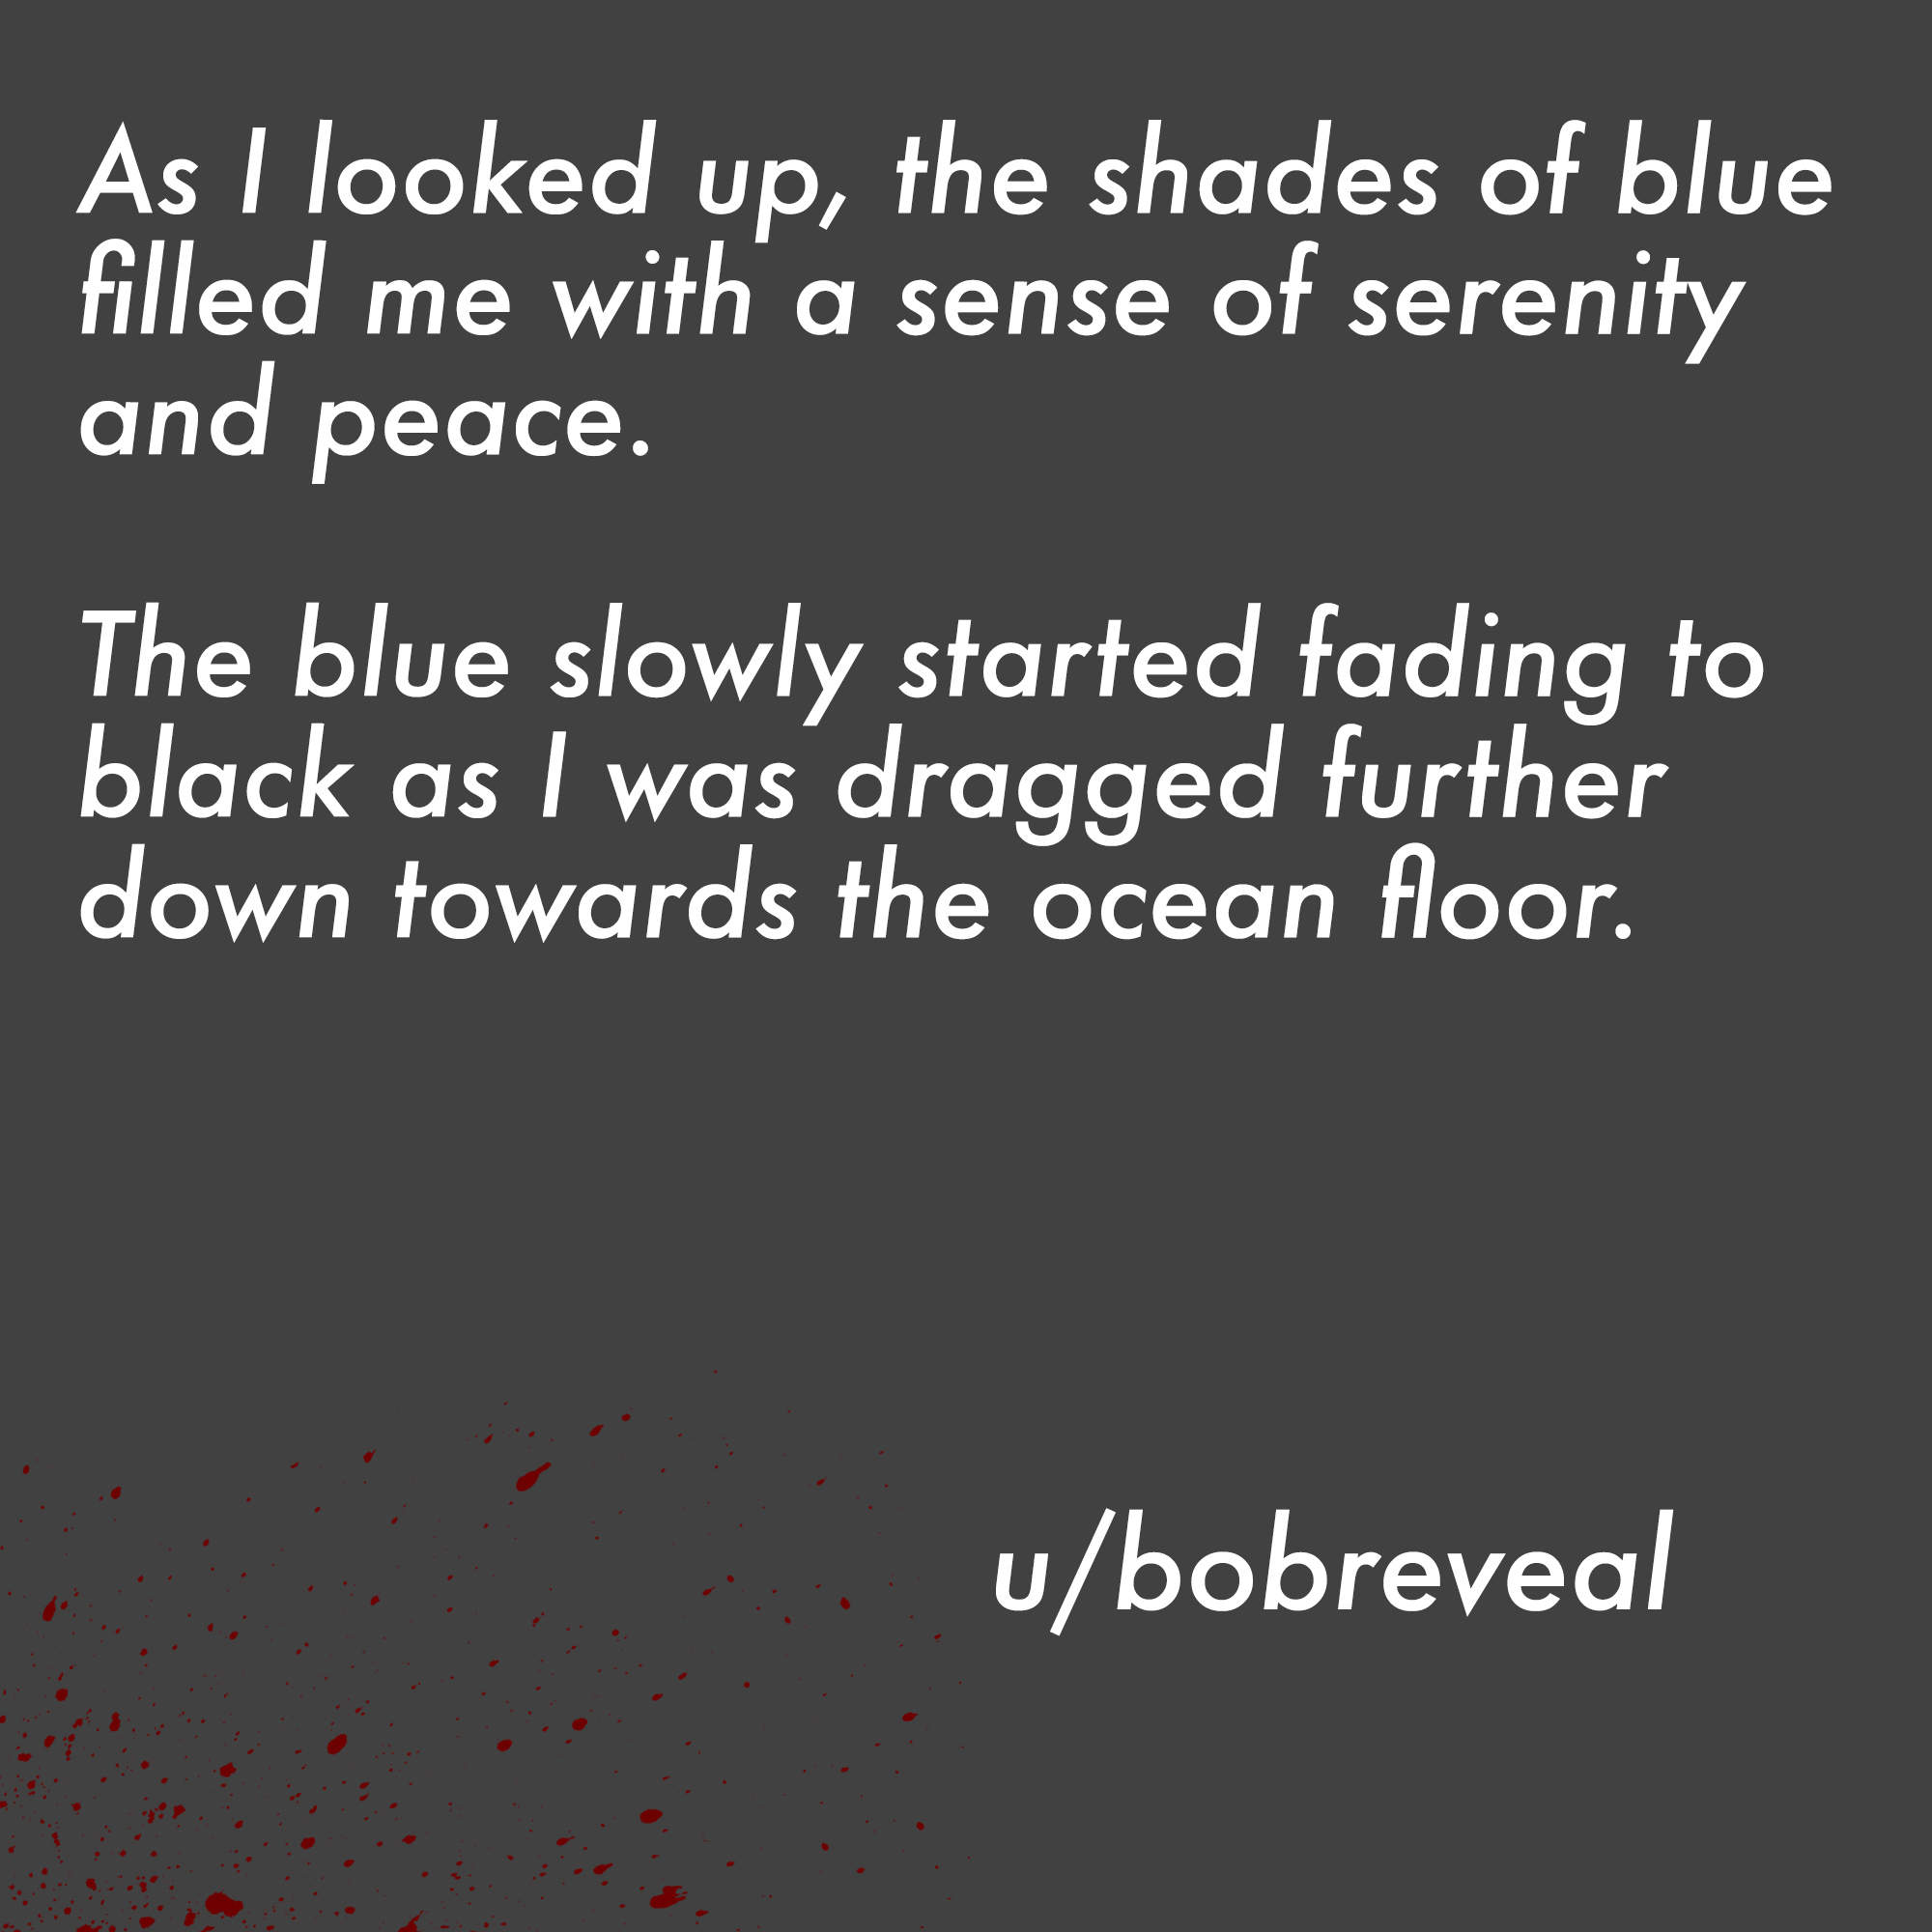 two line horror stories - mindless behavior my girl lyrics - As I looked up, the shades of blue filled me with a sense of serenity and peace. The blue slowly started fading to black as I was dragged further down towards the ocean floor. ubobreveal